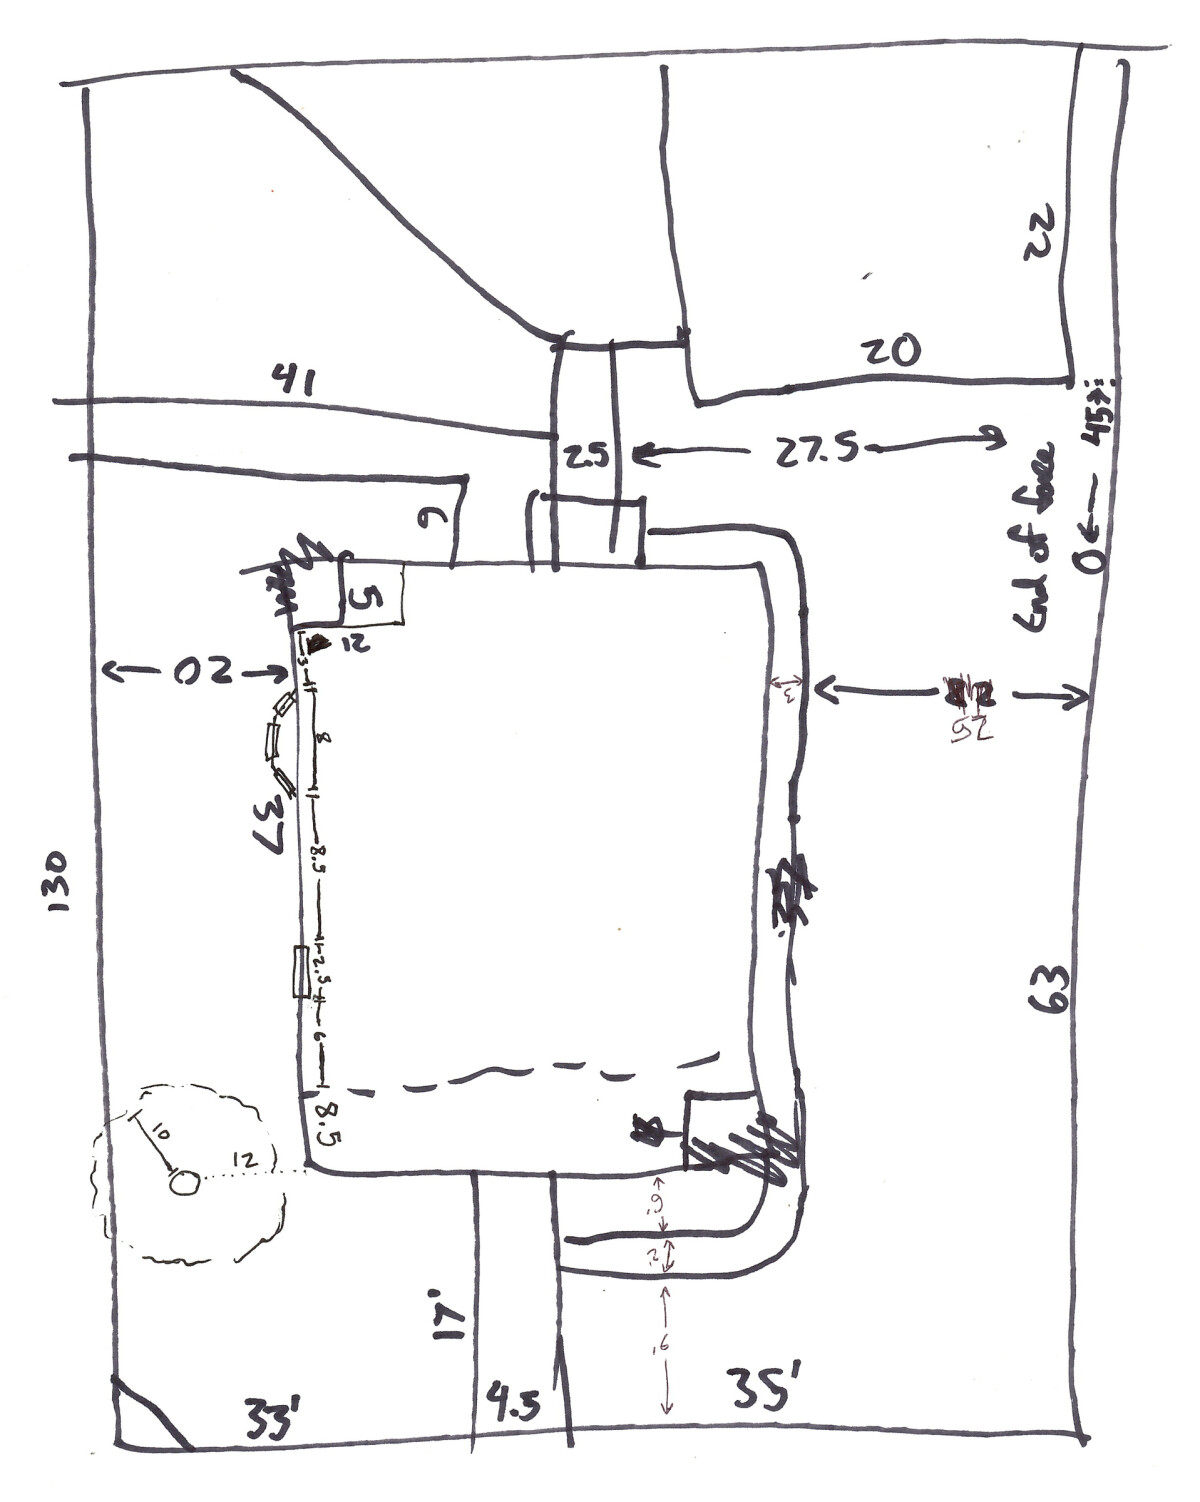 A very rough sketch of our lot layout